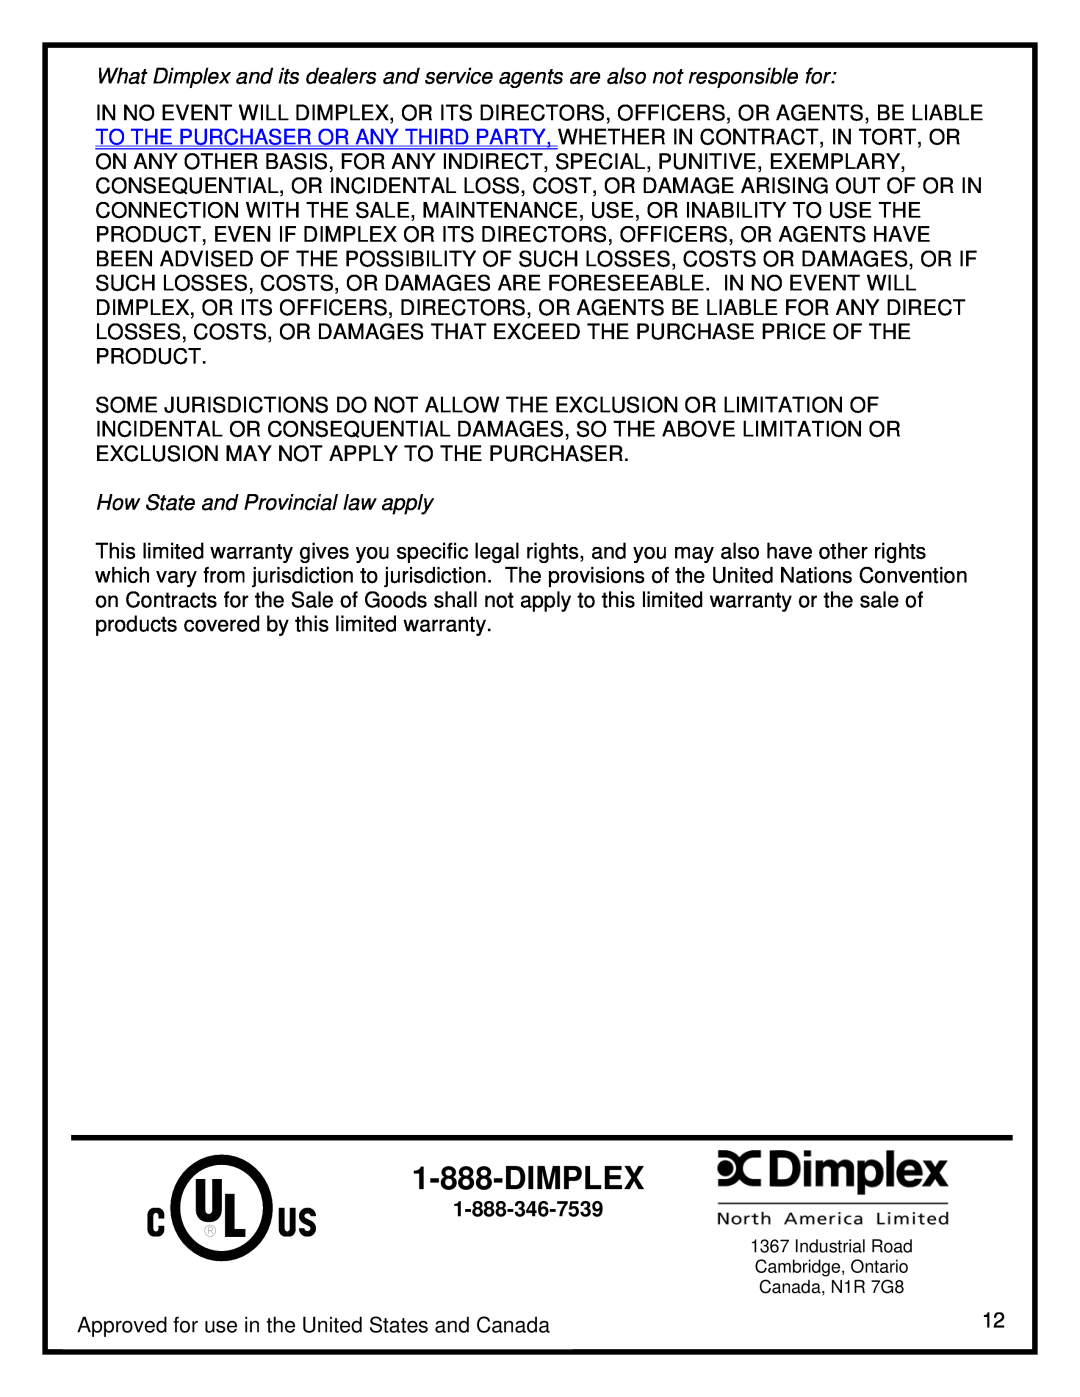 Dimplex EWM-SS manual Dimplex, How State and Provincial law apply 